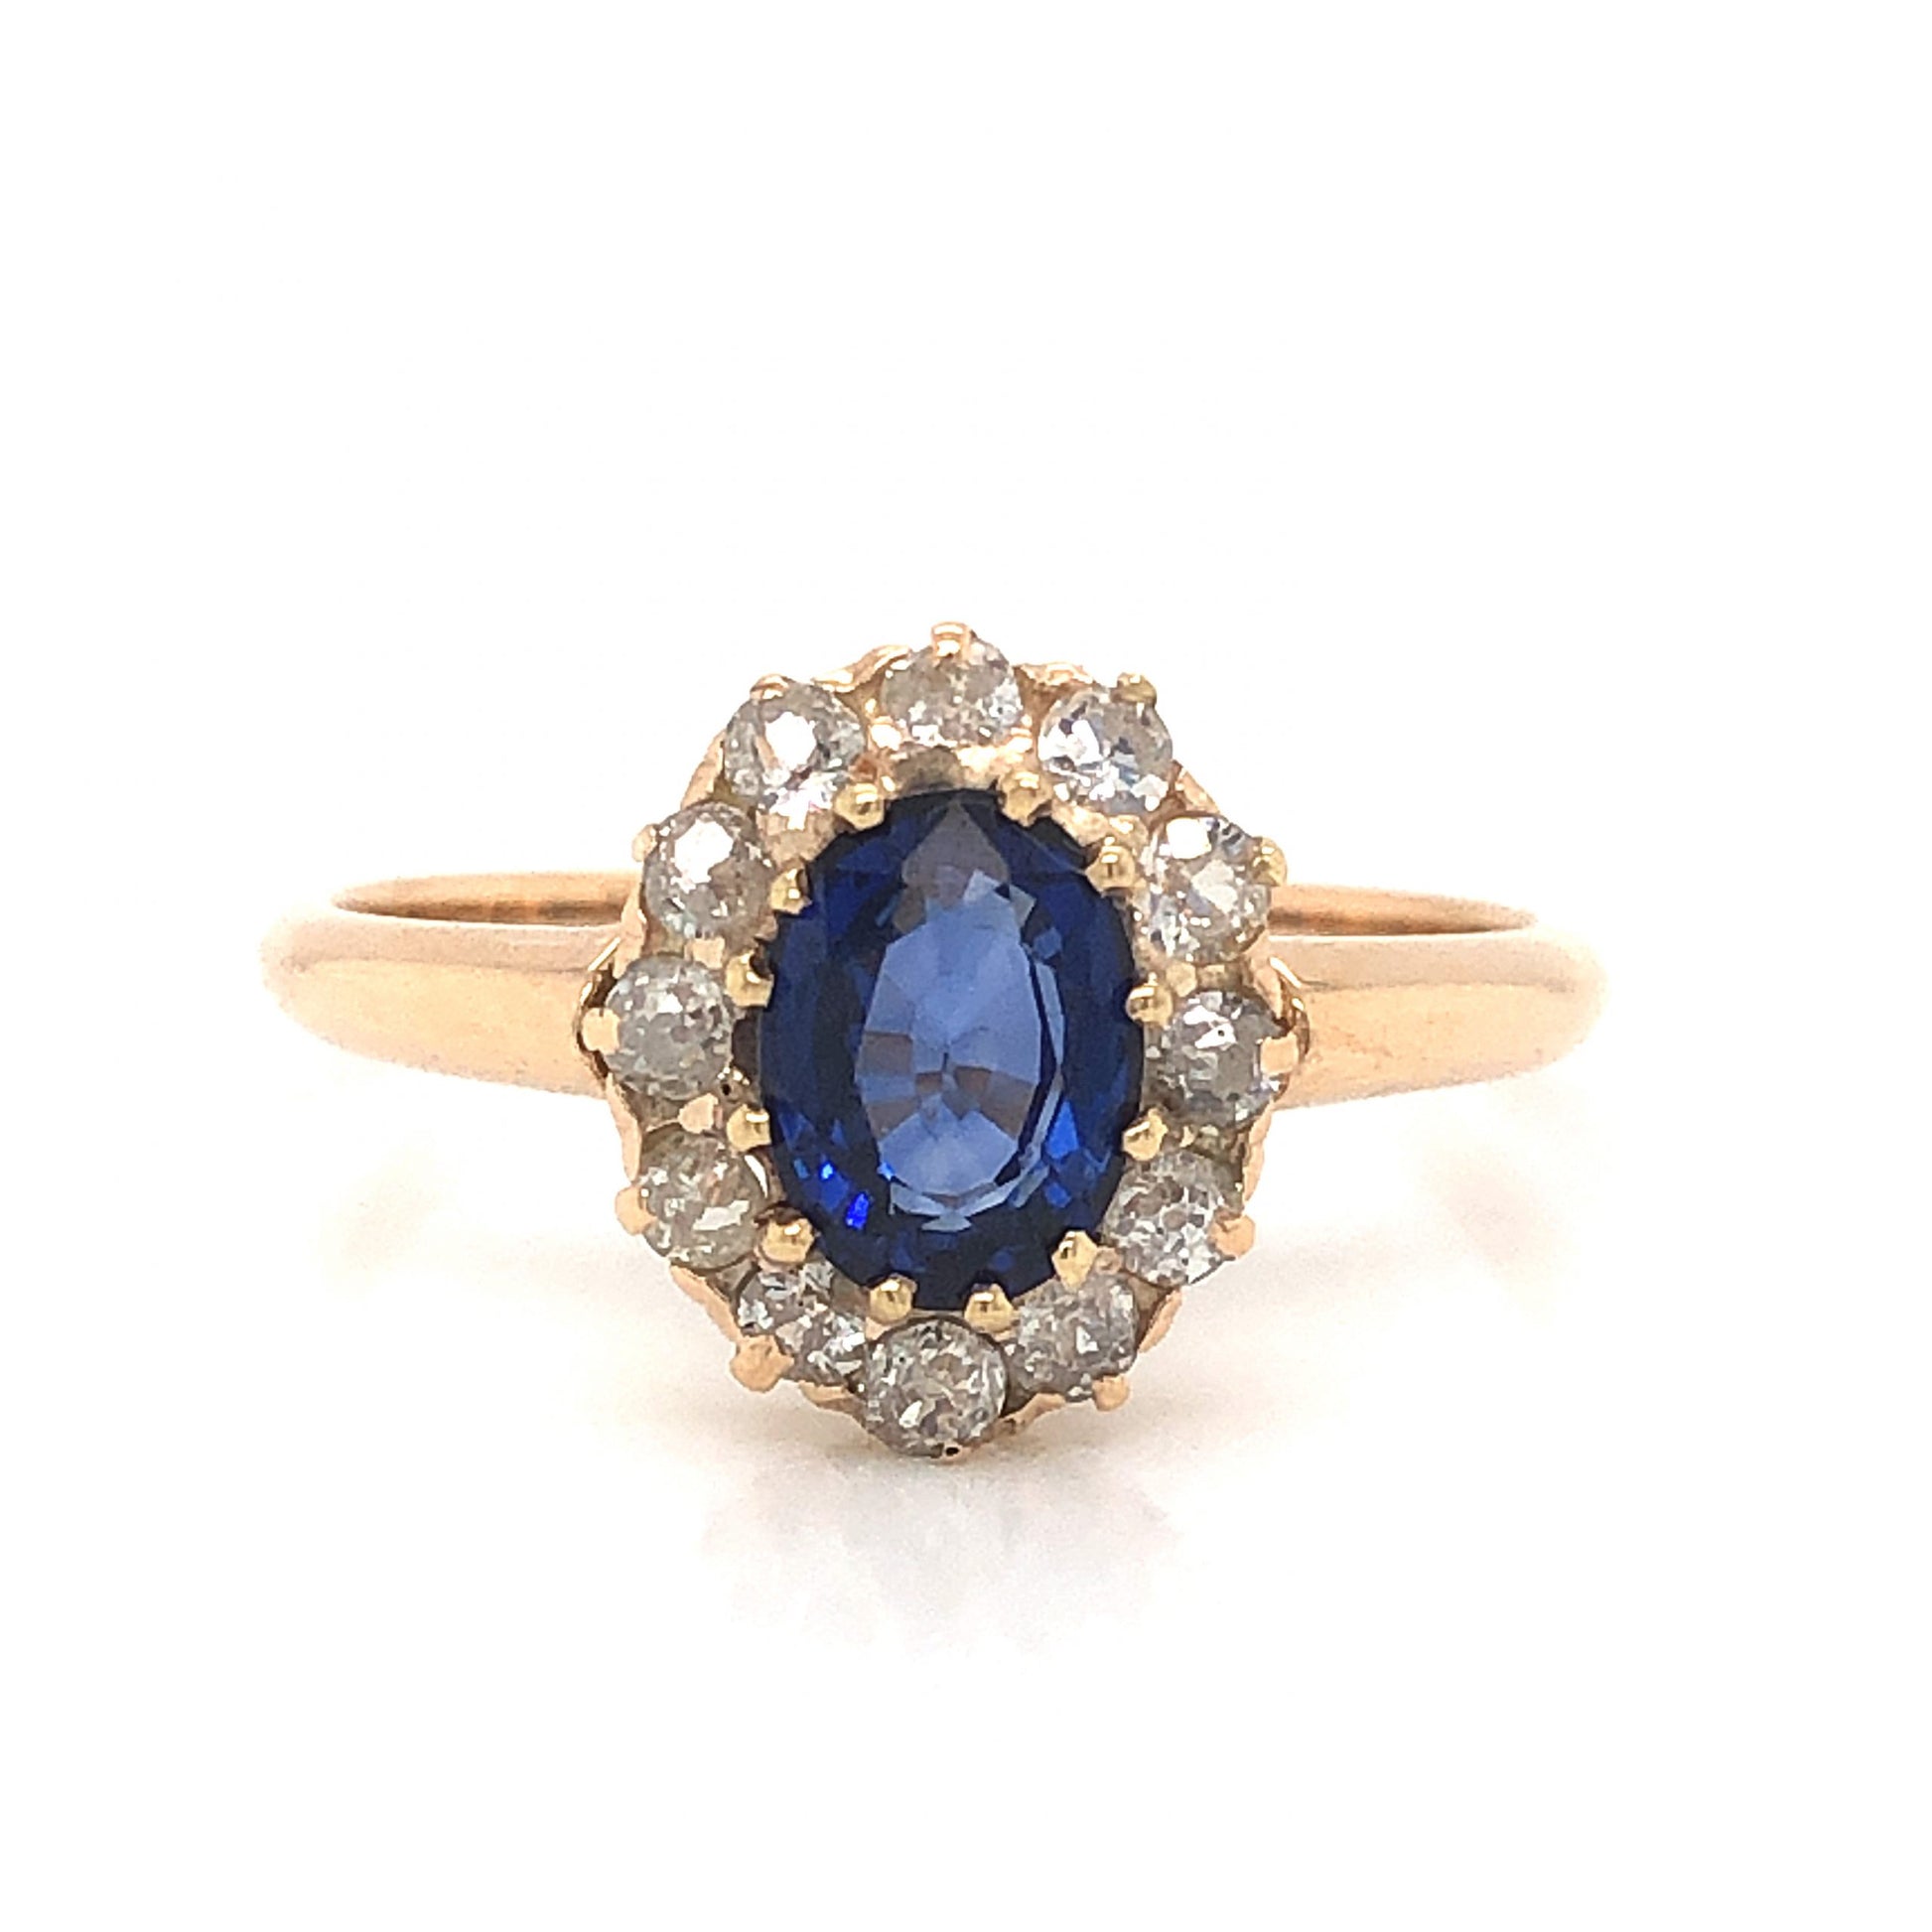 Victorian Oval Sapphire & Diamond Engagement Ring in 14k Yellow GoldComposition: 14 Karat Yellow GoldRing Size: 7.5Total Diamond Weight: .36 ctTotal Gram Weight: 2.3 gInscription: 14k